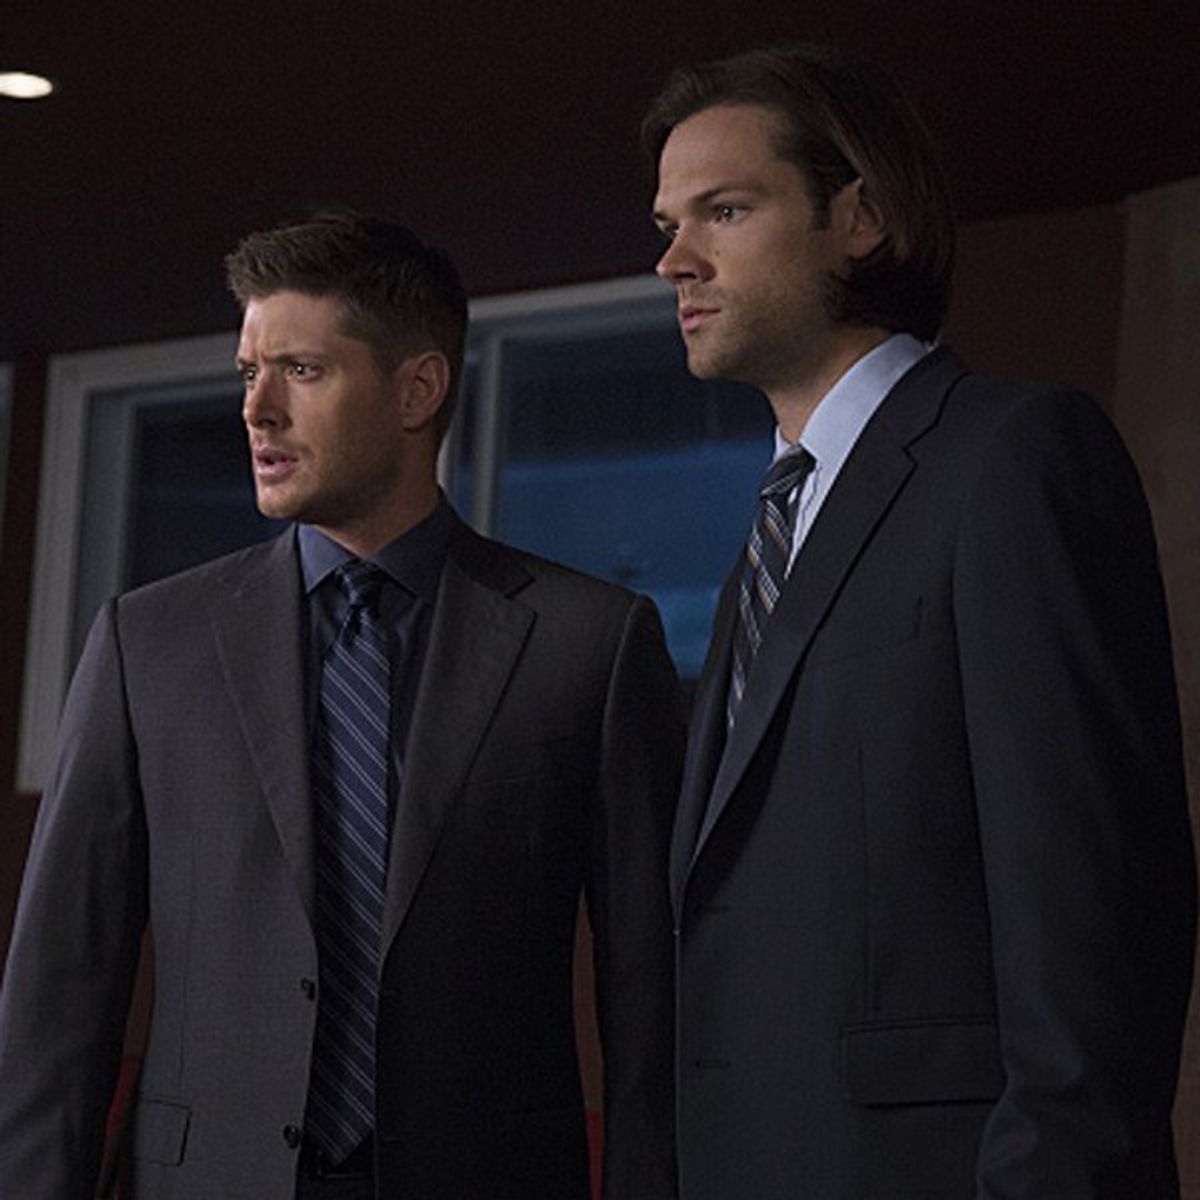 What "Supernatural" Means to Me